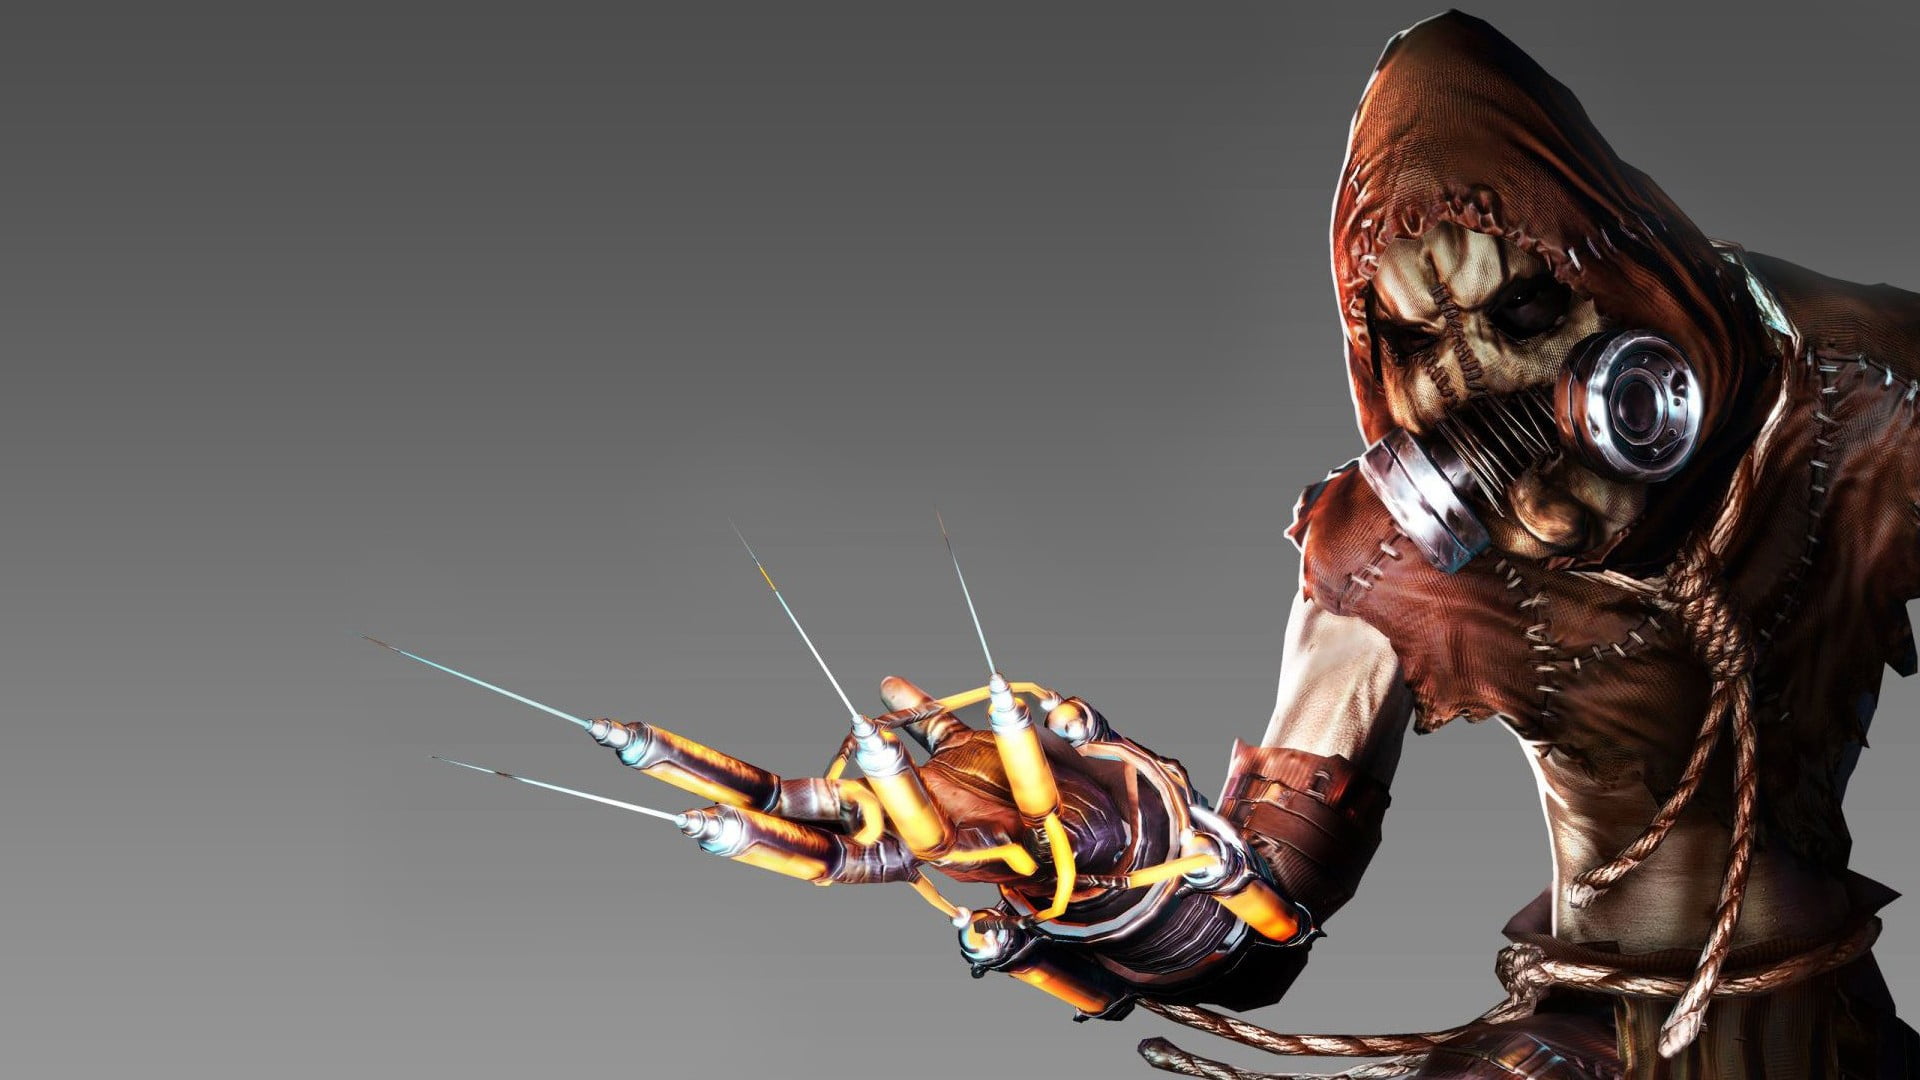 scarecrow batman wallpaper,action adventure game,bow and arrow,cg artwork,fictional character,pc game